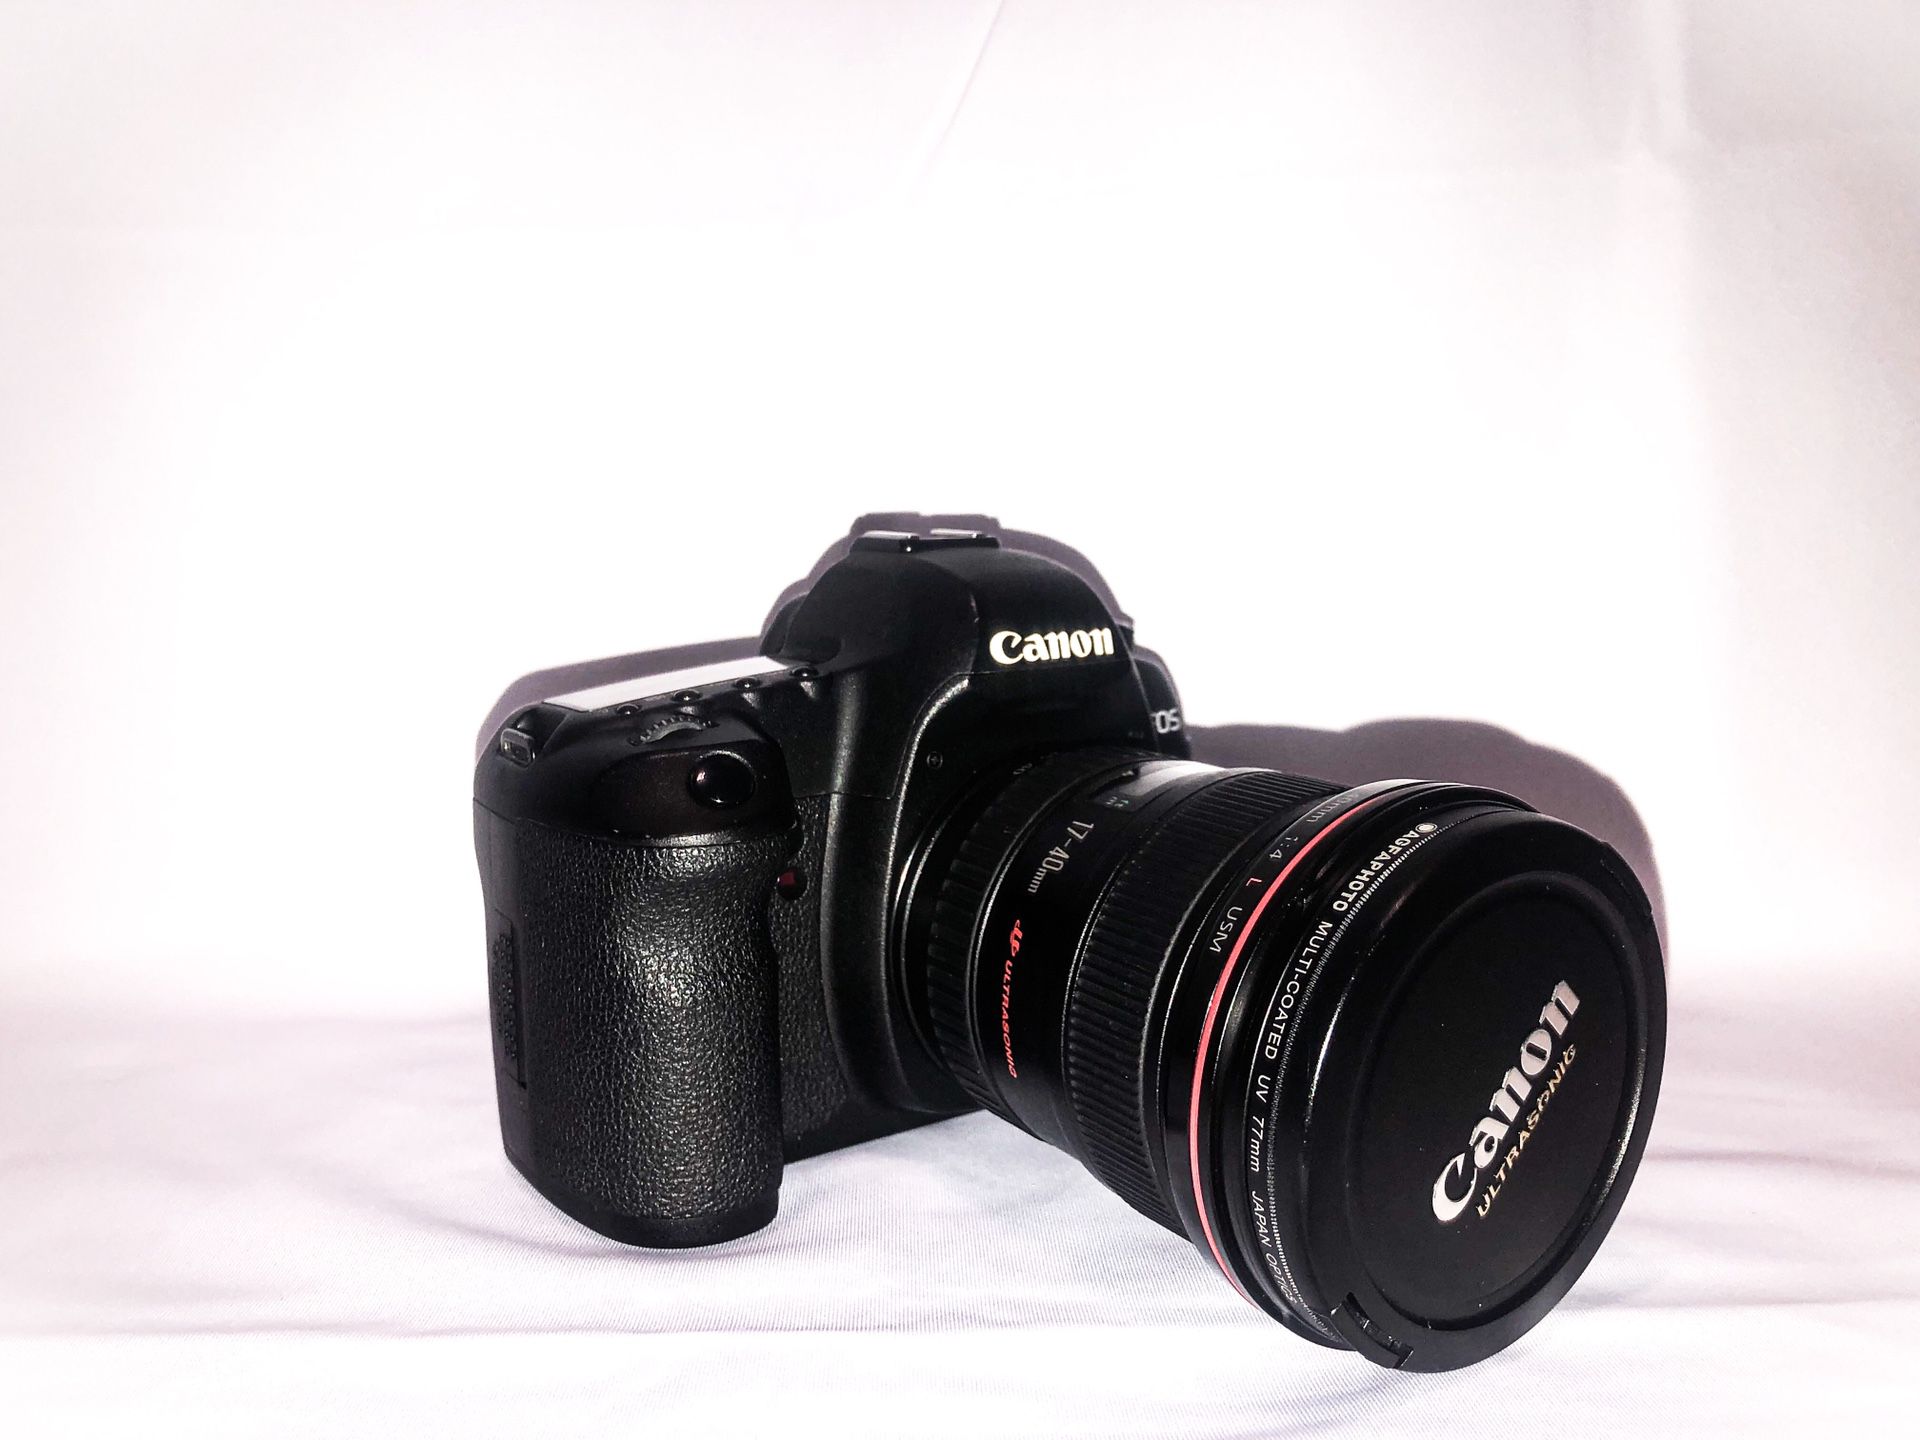 Canon 5D mark ii with a L lens very low shutter count